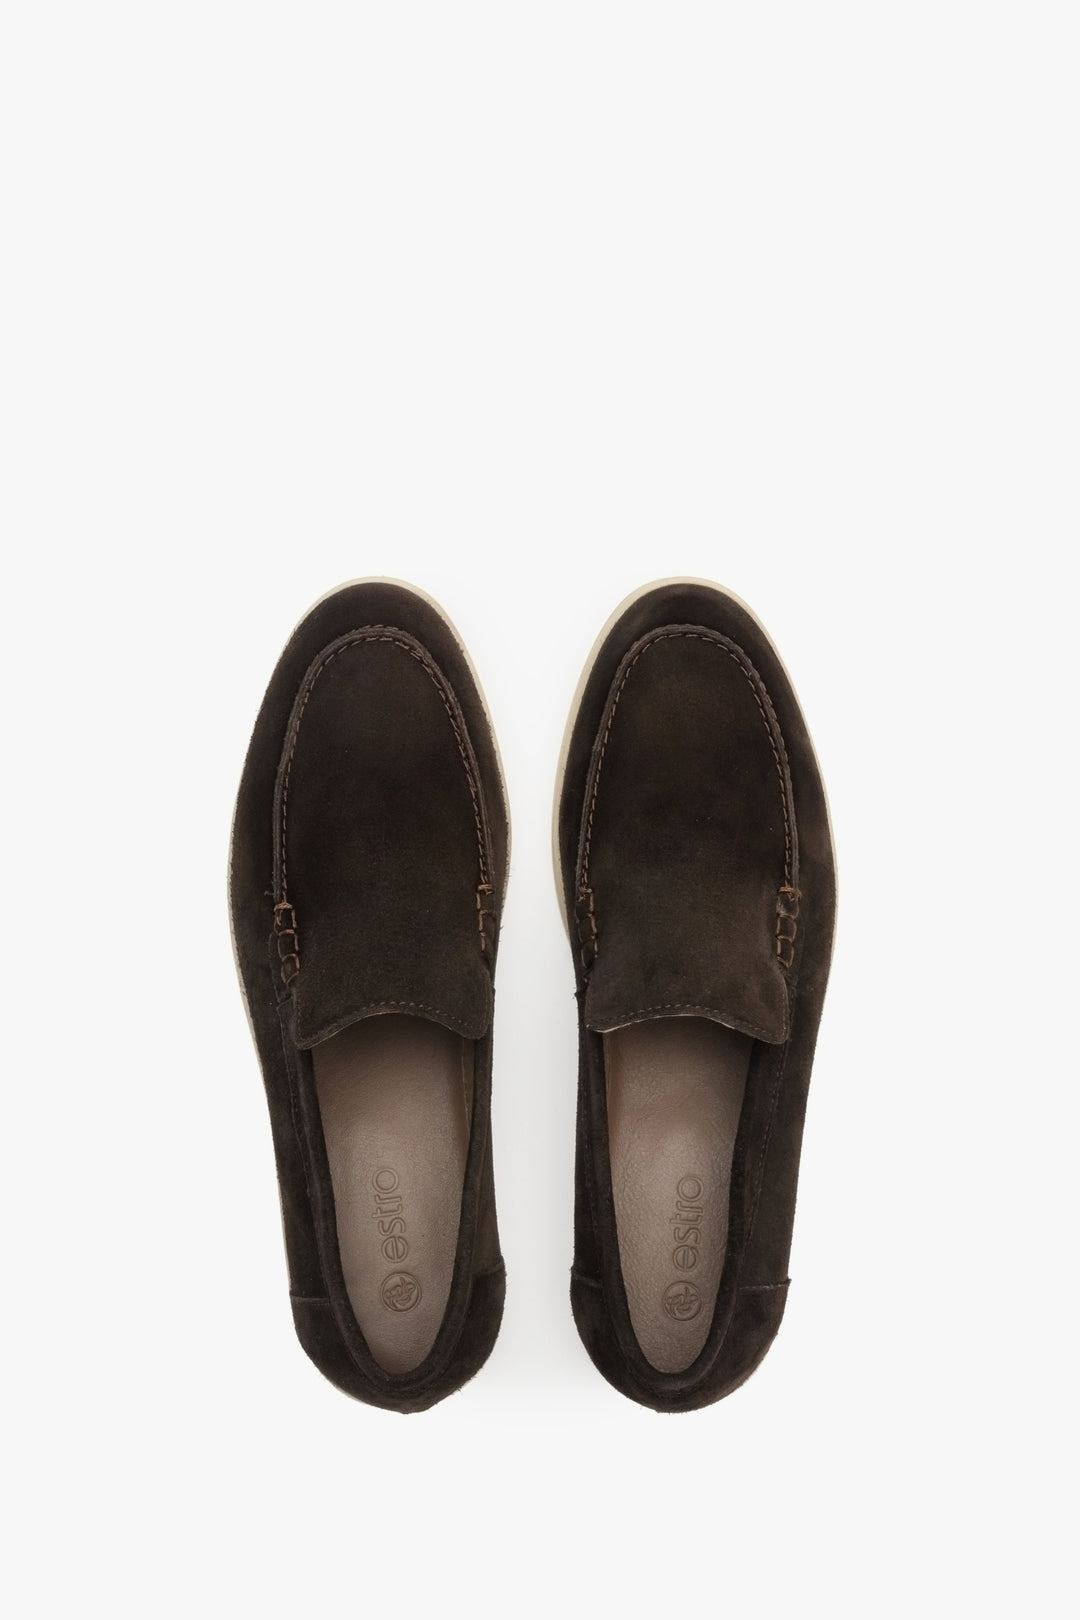 Women's suede loafers in saddle brown Estro - presentation of footwear from above.